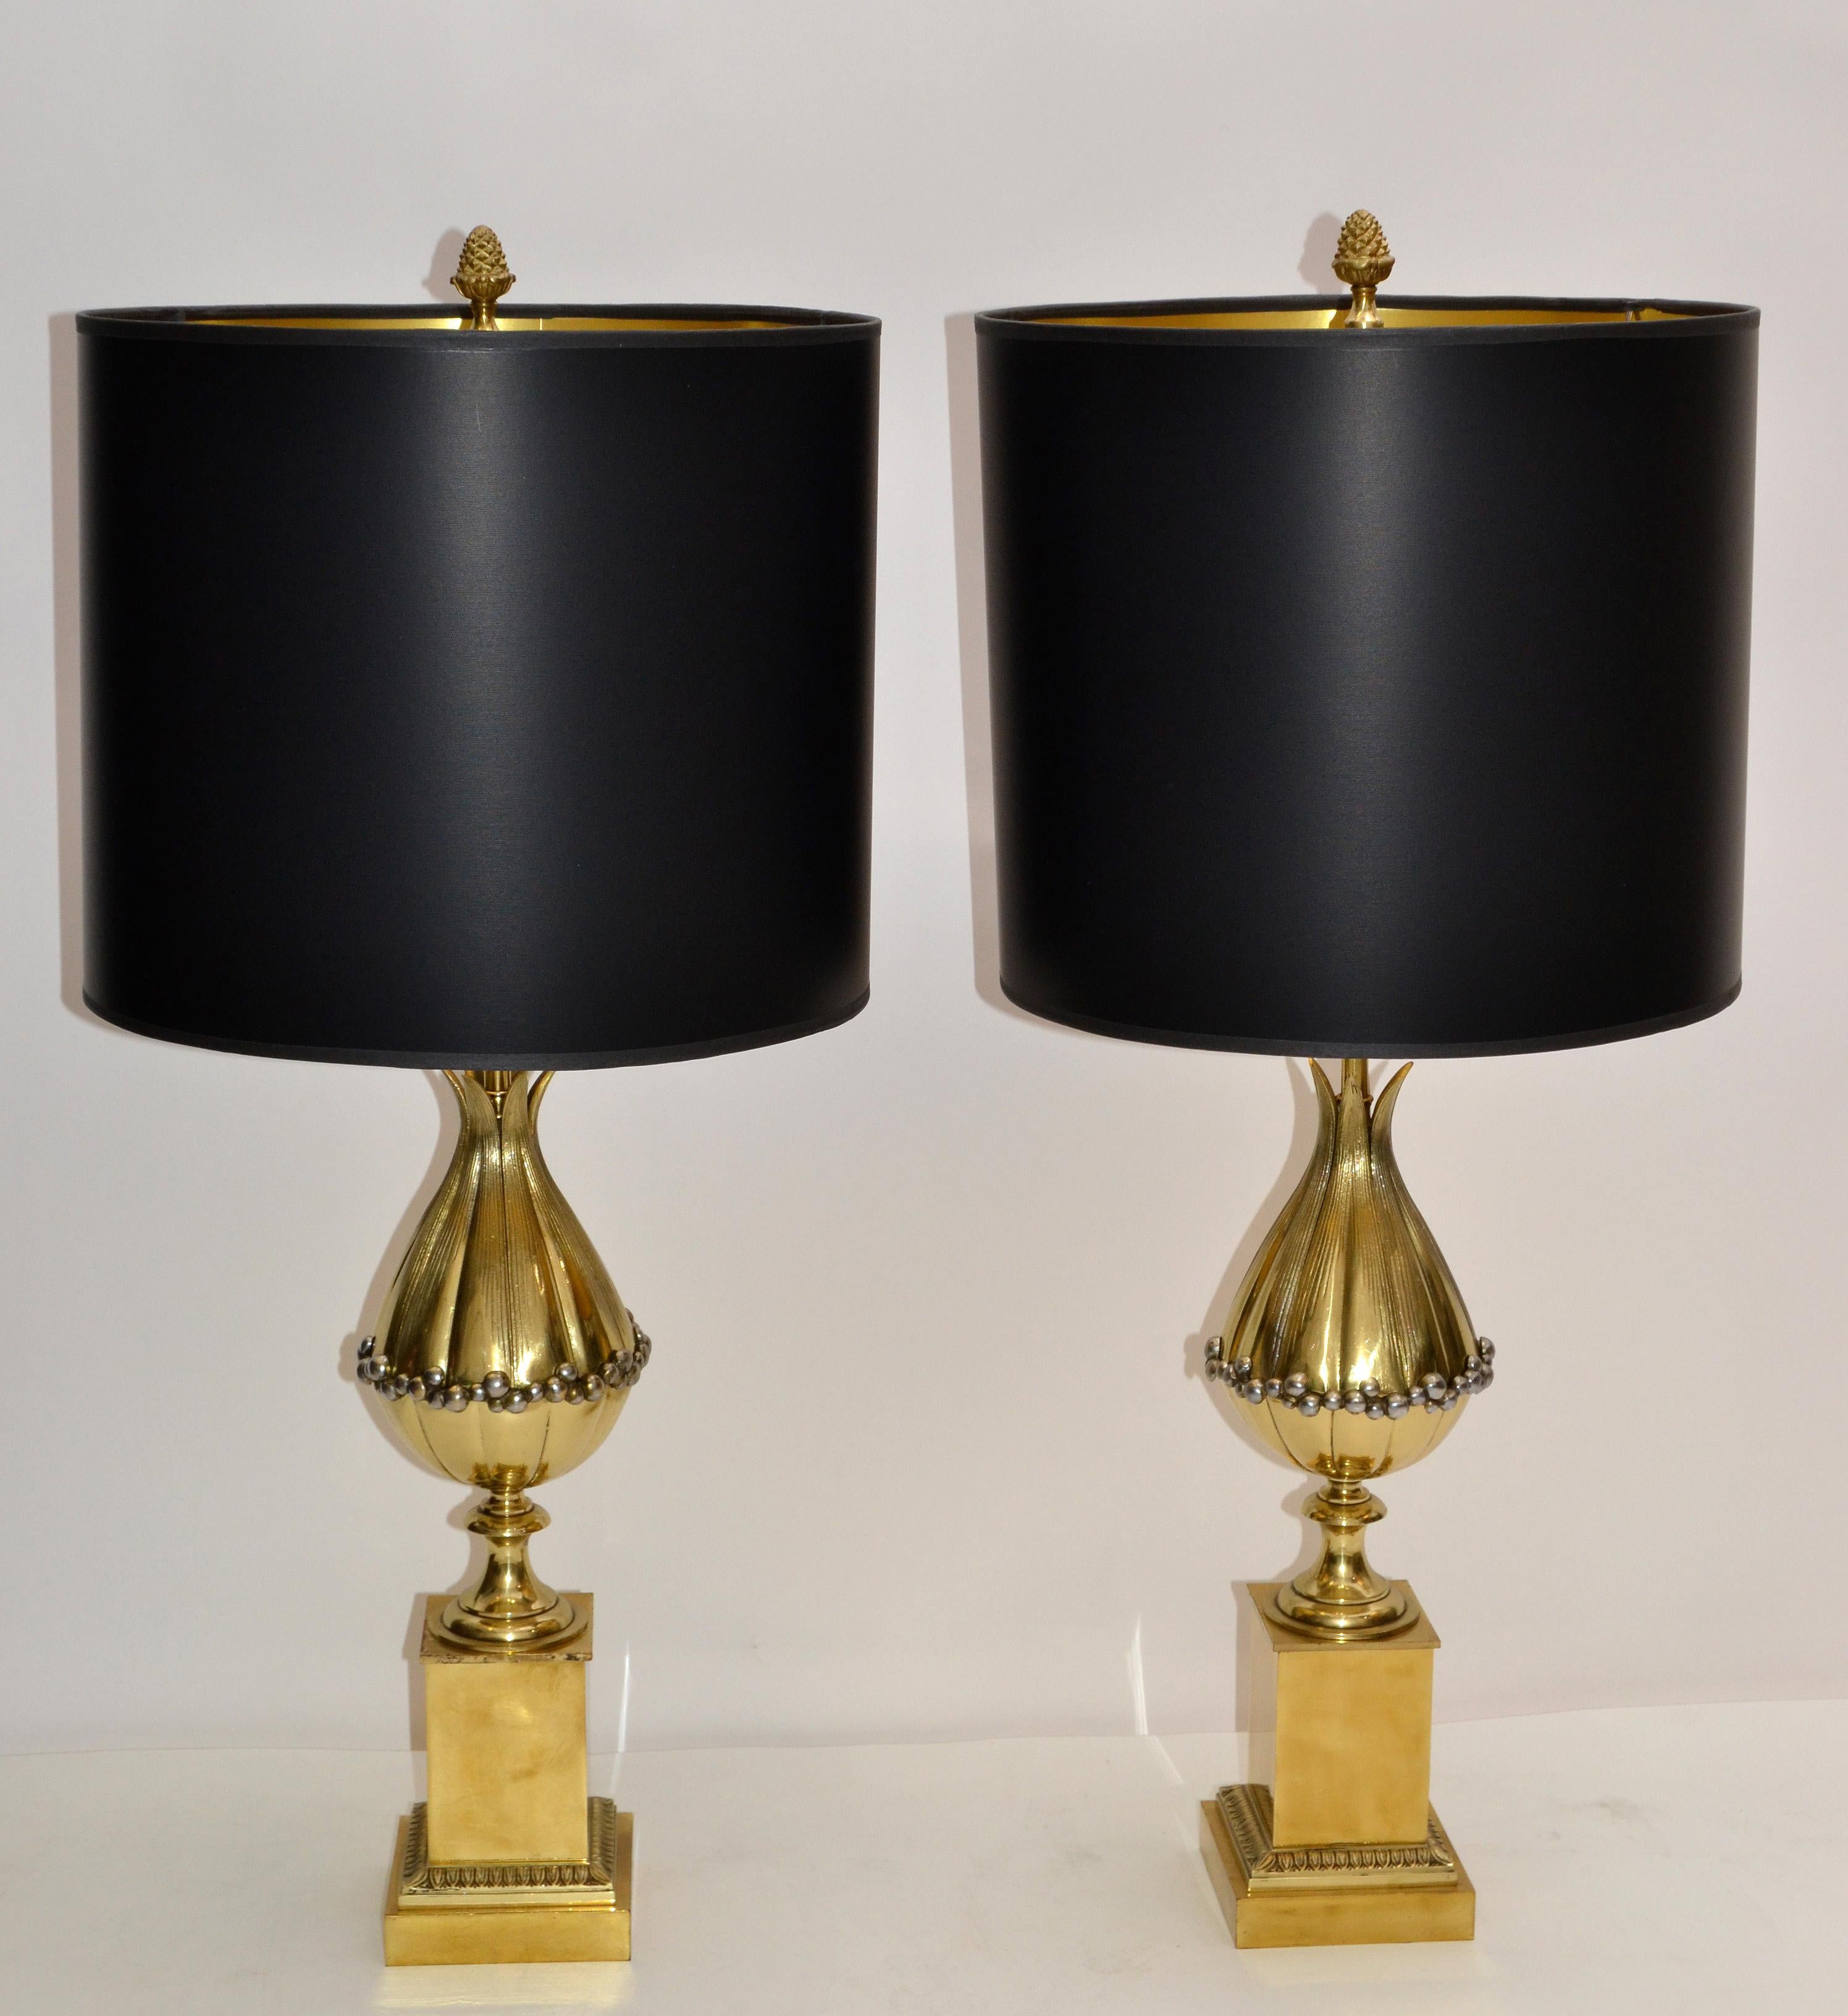 Superb pair of Maison Charles French Art Deco lotus table lamp in bronze with black and gold paper shade.
US rewired and in working condition and each Lamp takes two light bulbs max 40 watts, LED work too.
Measure:
Base is 4.5 inches by 4.5